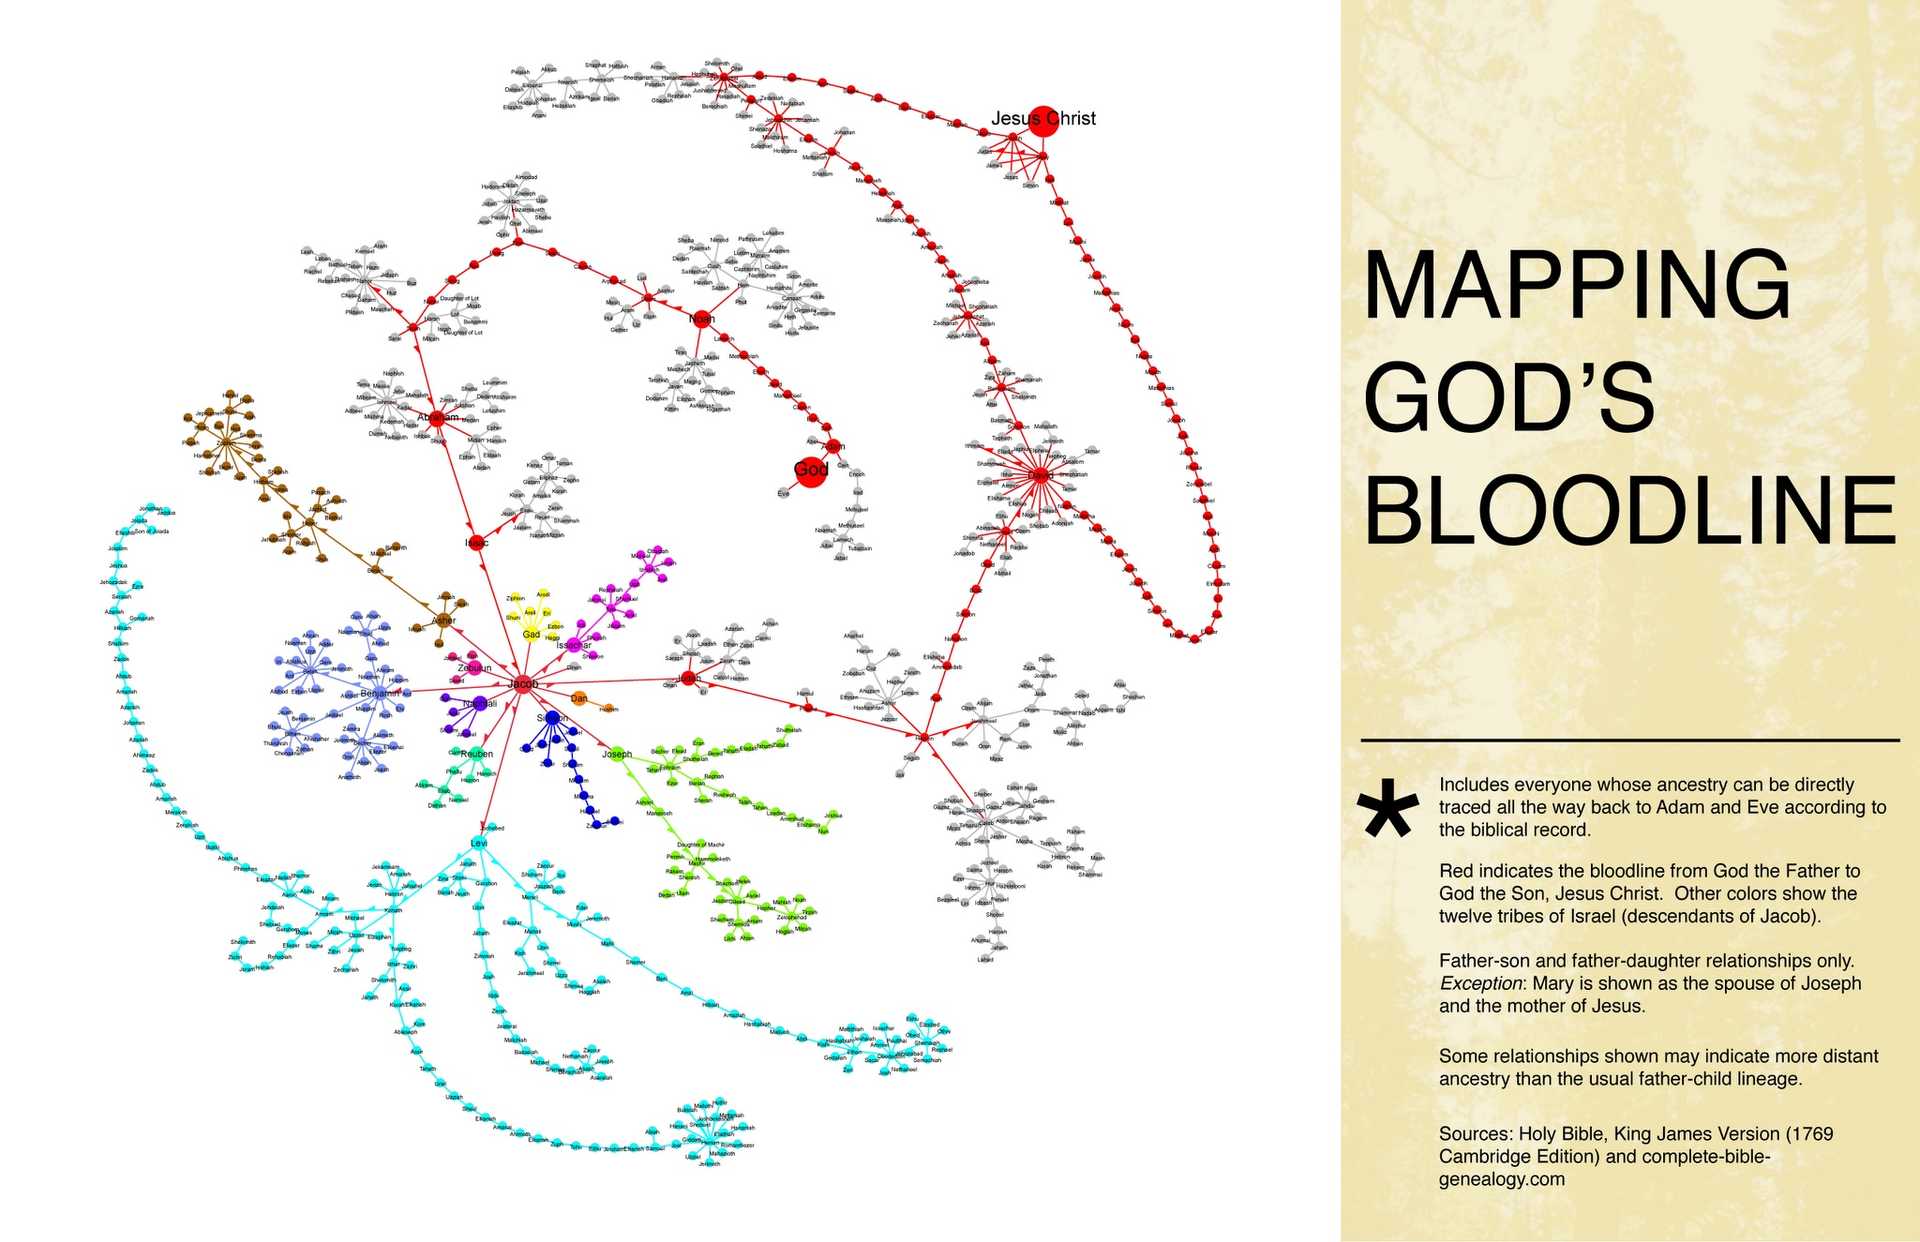 Mapping God’s Bloodline